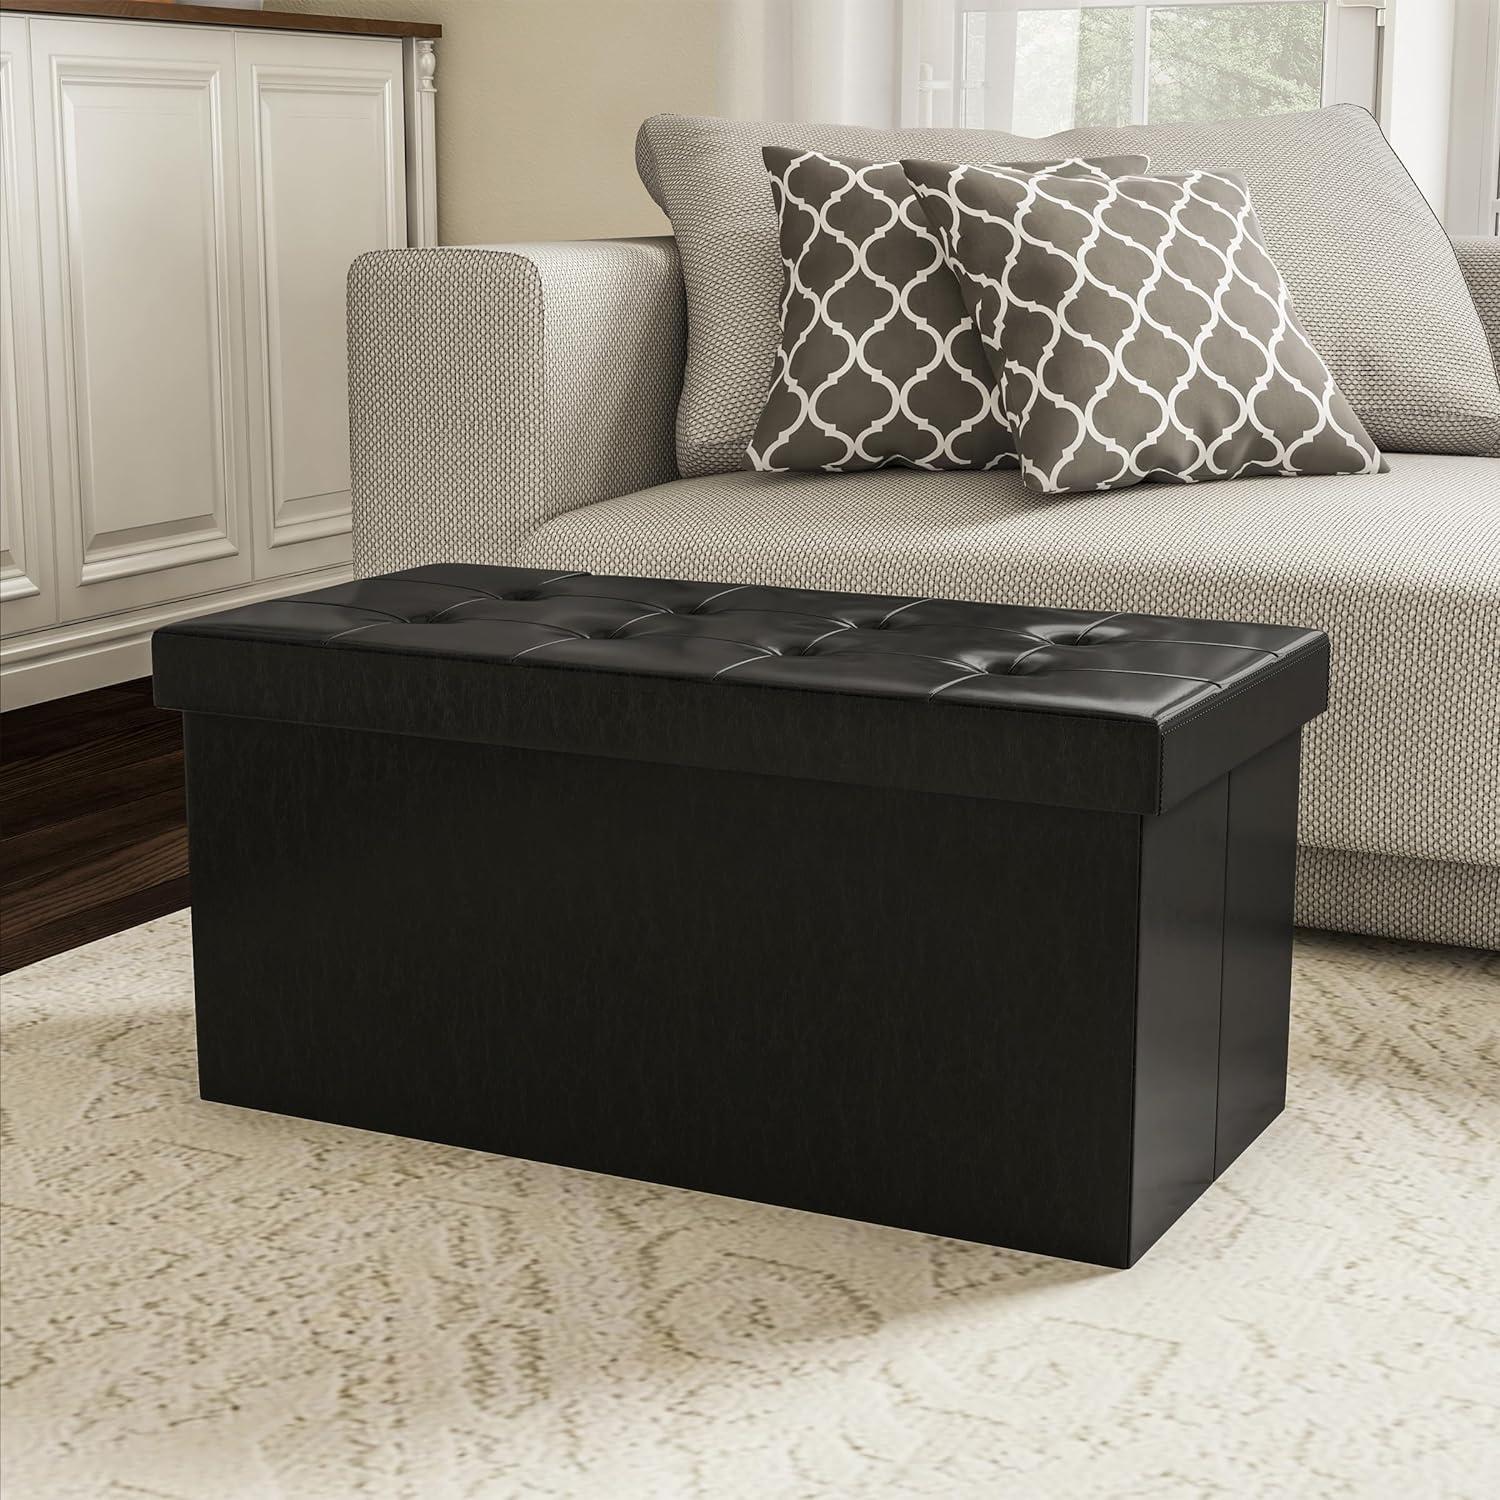 Chic Black Faux Leather 30" Folding Storage Ottoman with Removable Bin